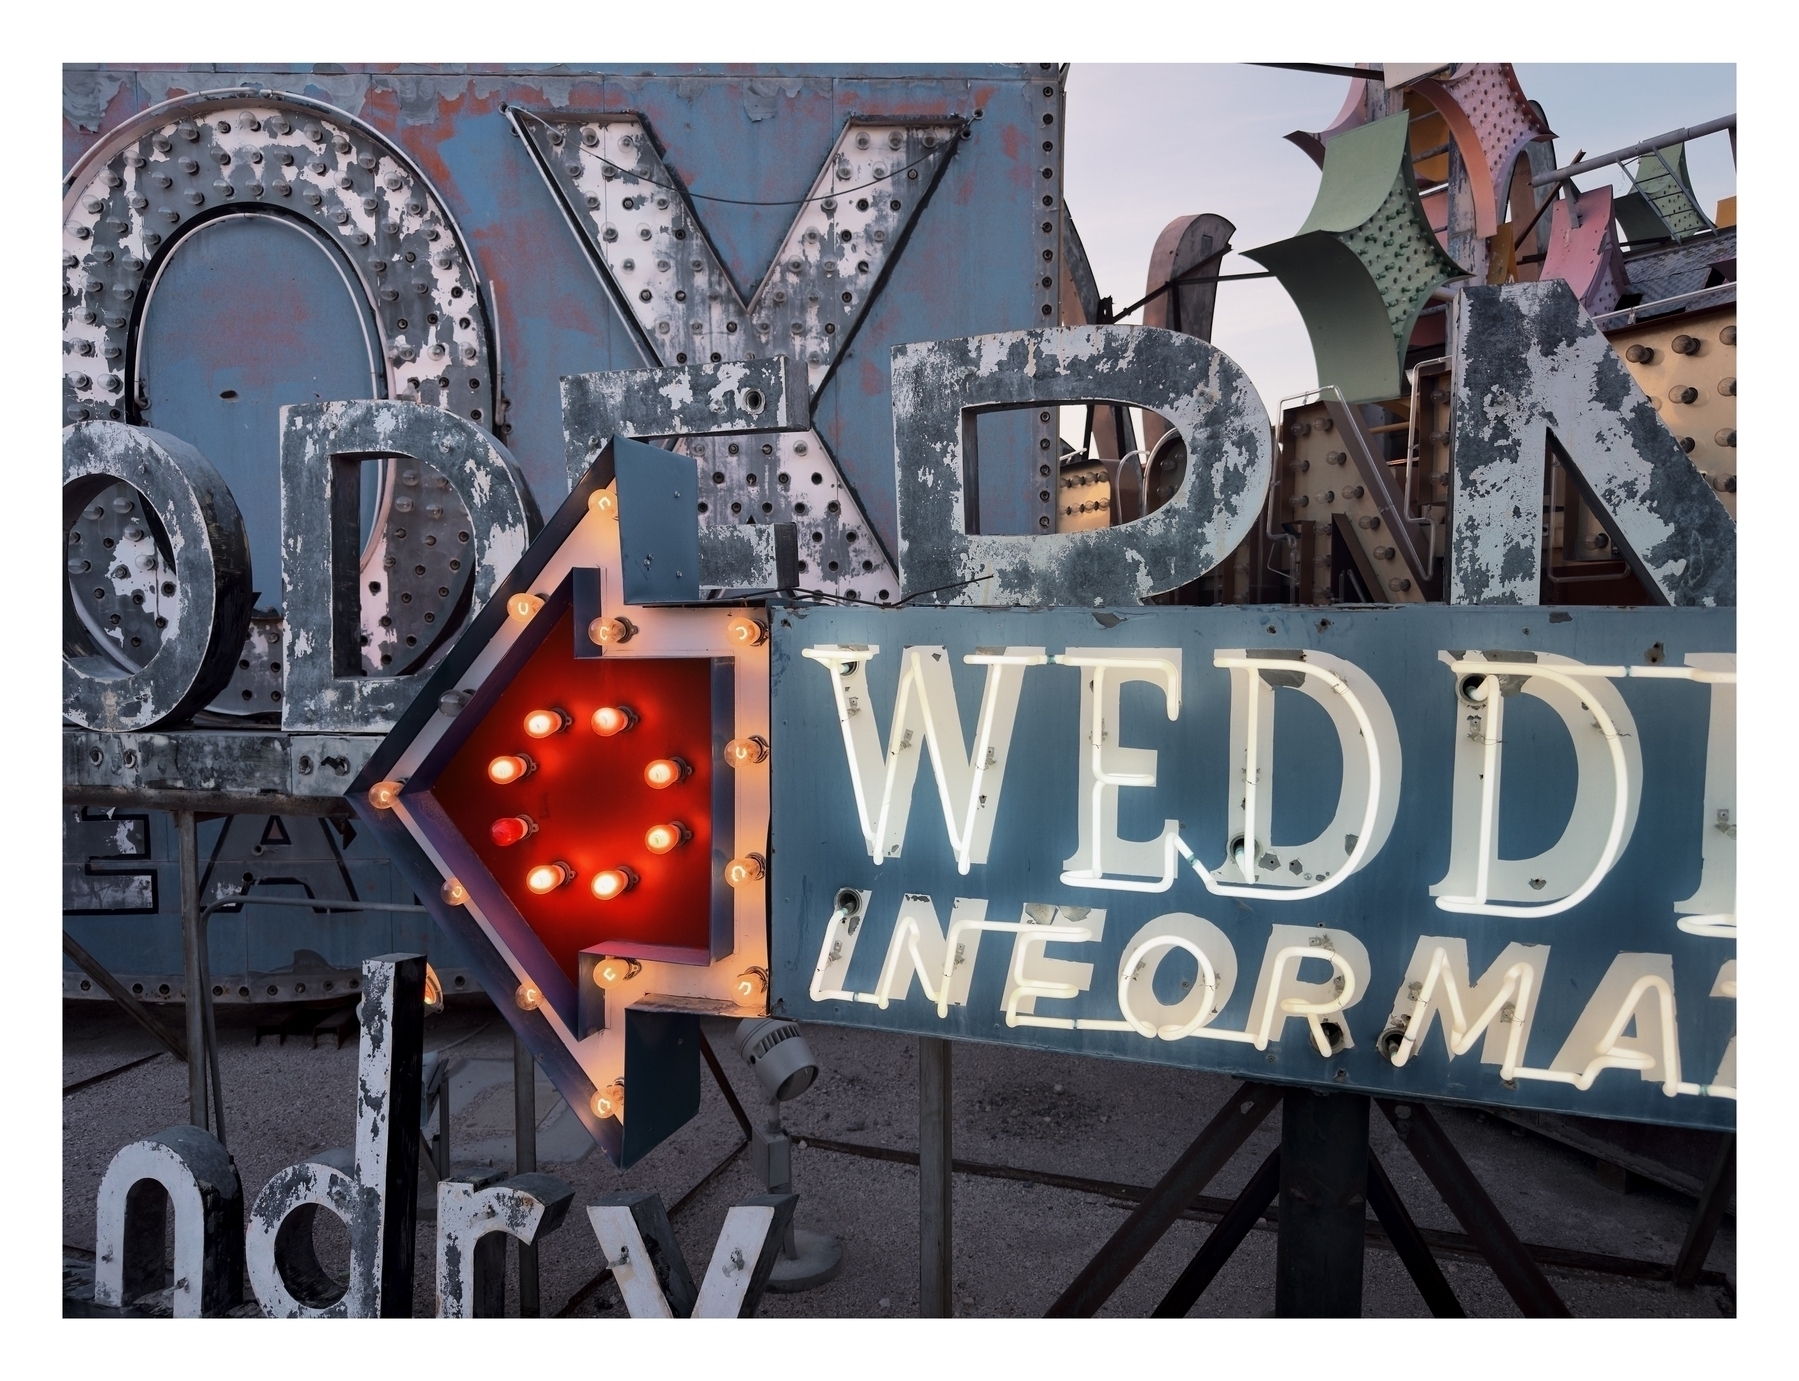 Weathered, oversized letters and illuminated signs, arranged haphazardly, create a vintage urban display set against a twilight sky.